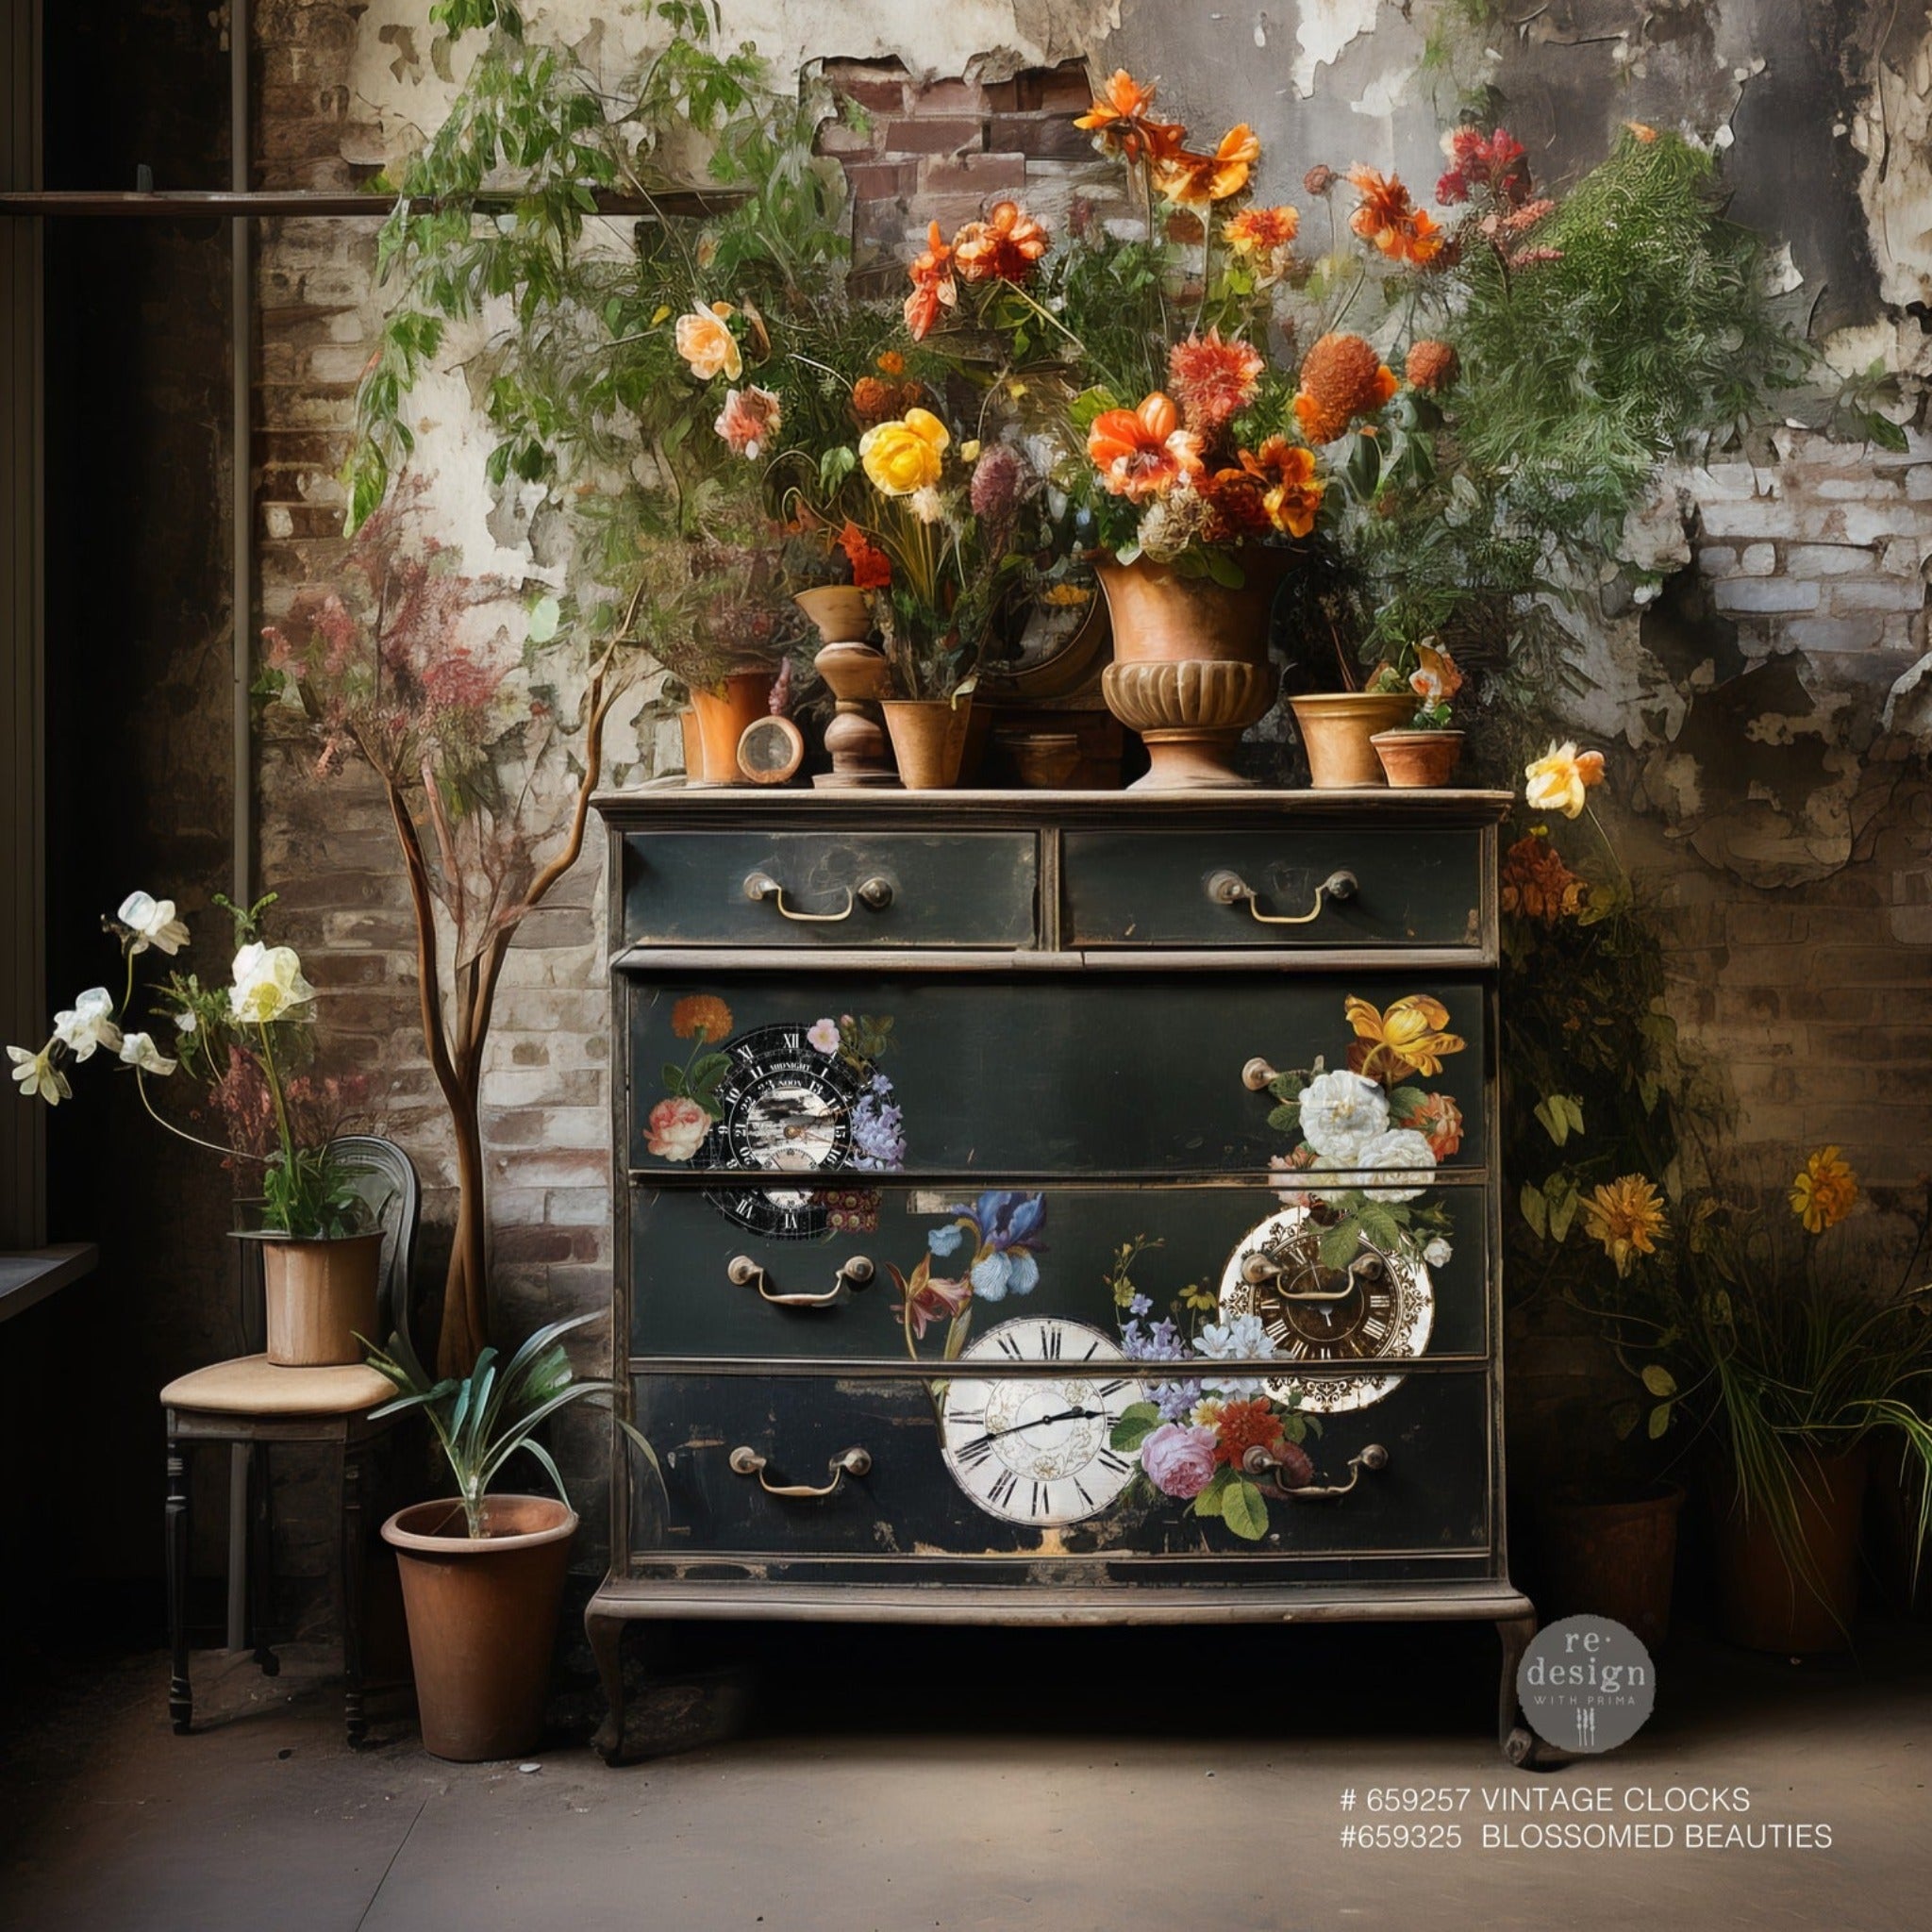 A vintage 5-drawer dresser is painted a weathered black and features ReDesign with Prima's Blossomed Beauties small transfer on the bottom 3 drawers along with ReDesign with Prima's Vintage Clocks transfer.